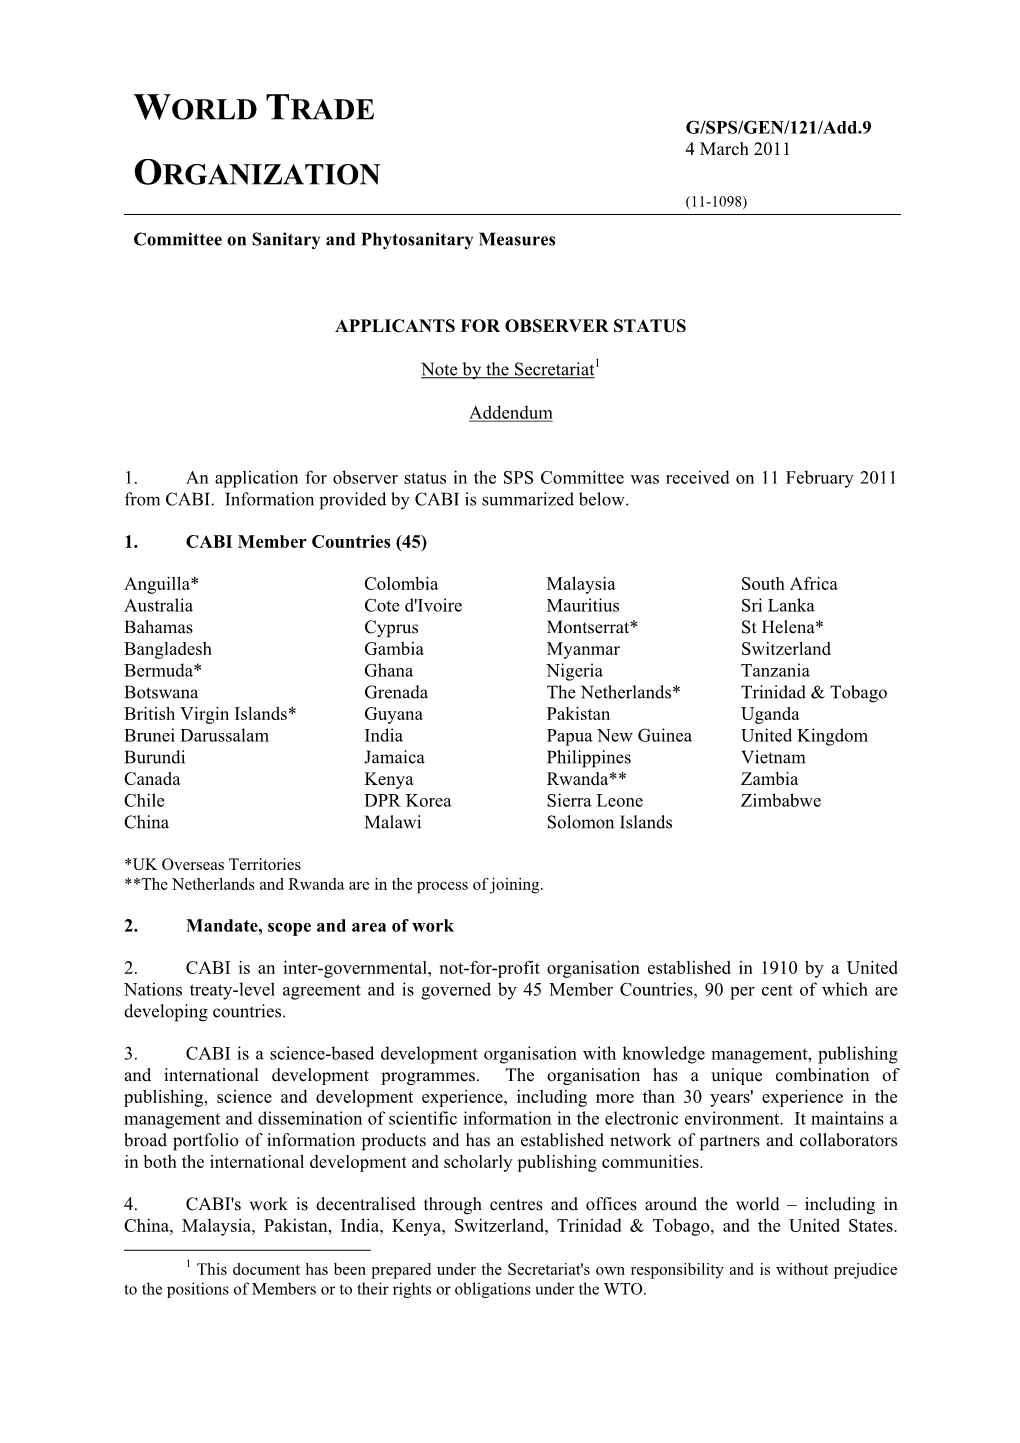 G/SPS/GEN/121/Add.9 4 March 2011 ORGANIZATION (11-1098) Committee on Sanitary and Phytosanitary Measures